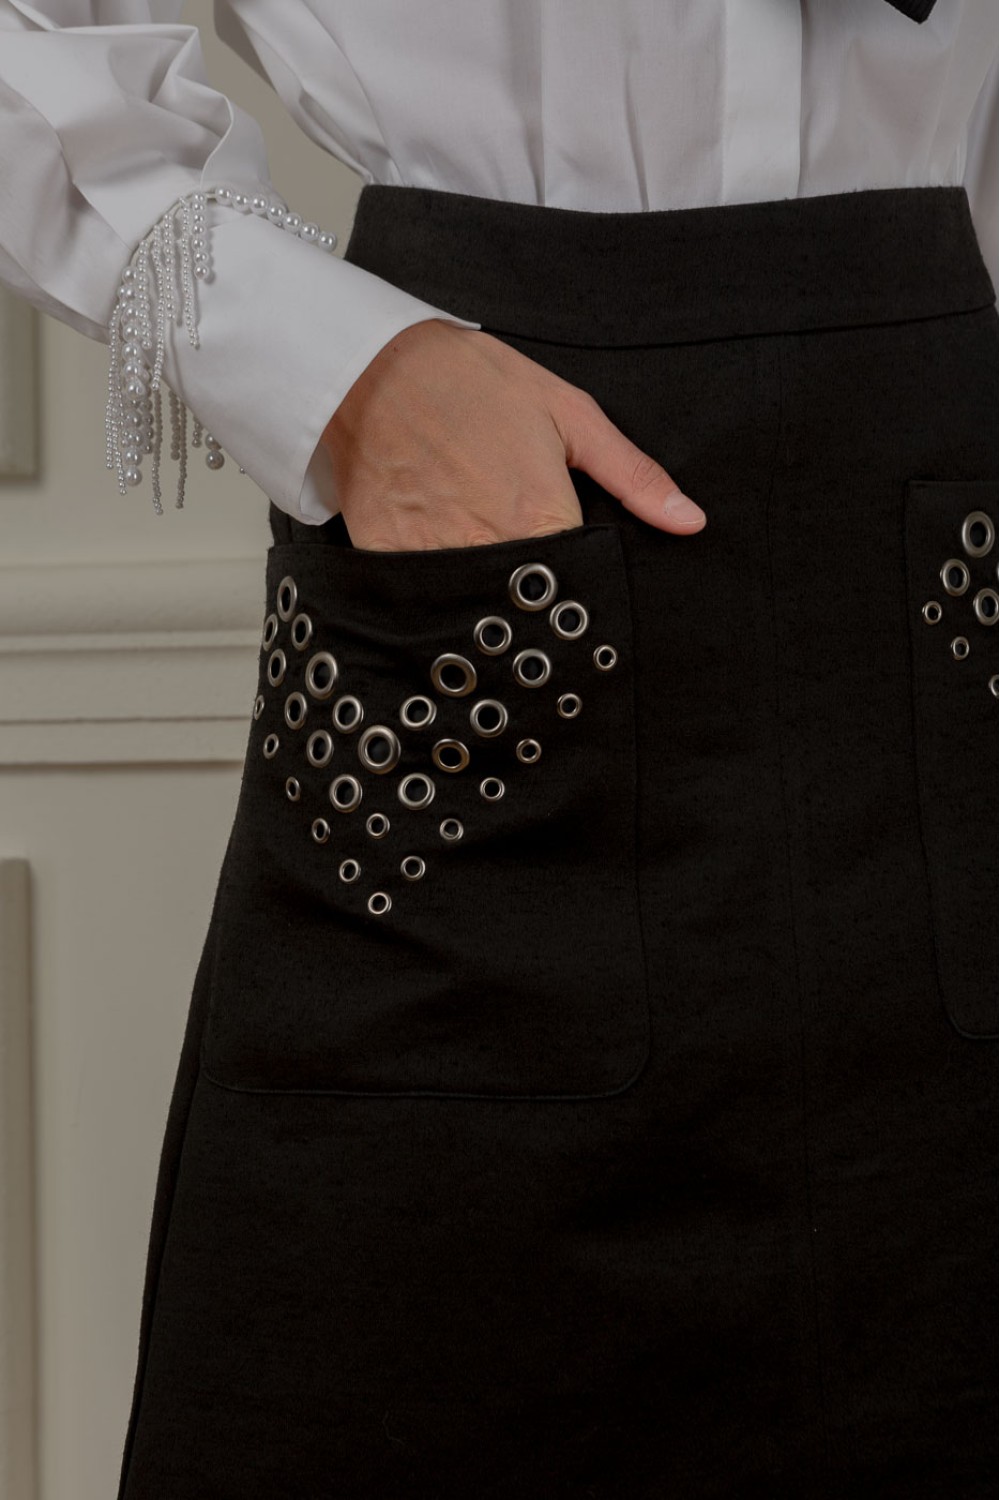 Gloucester skirt decorated with eyelets